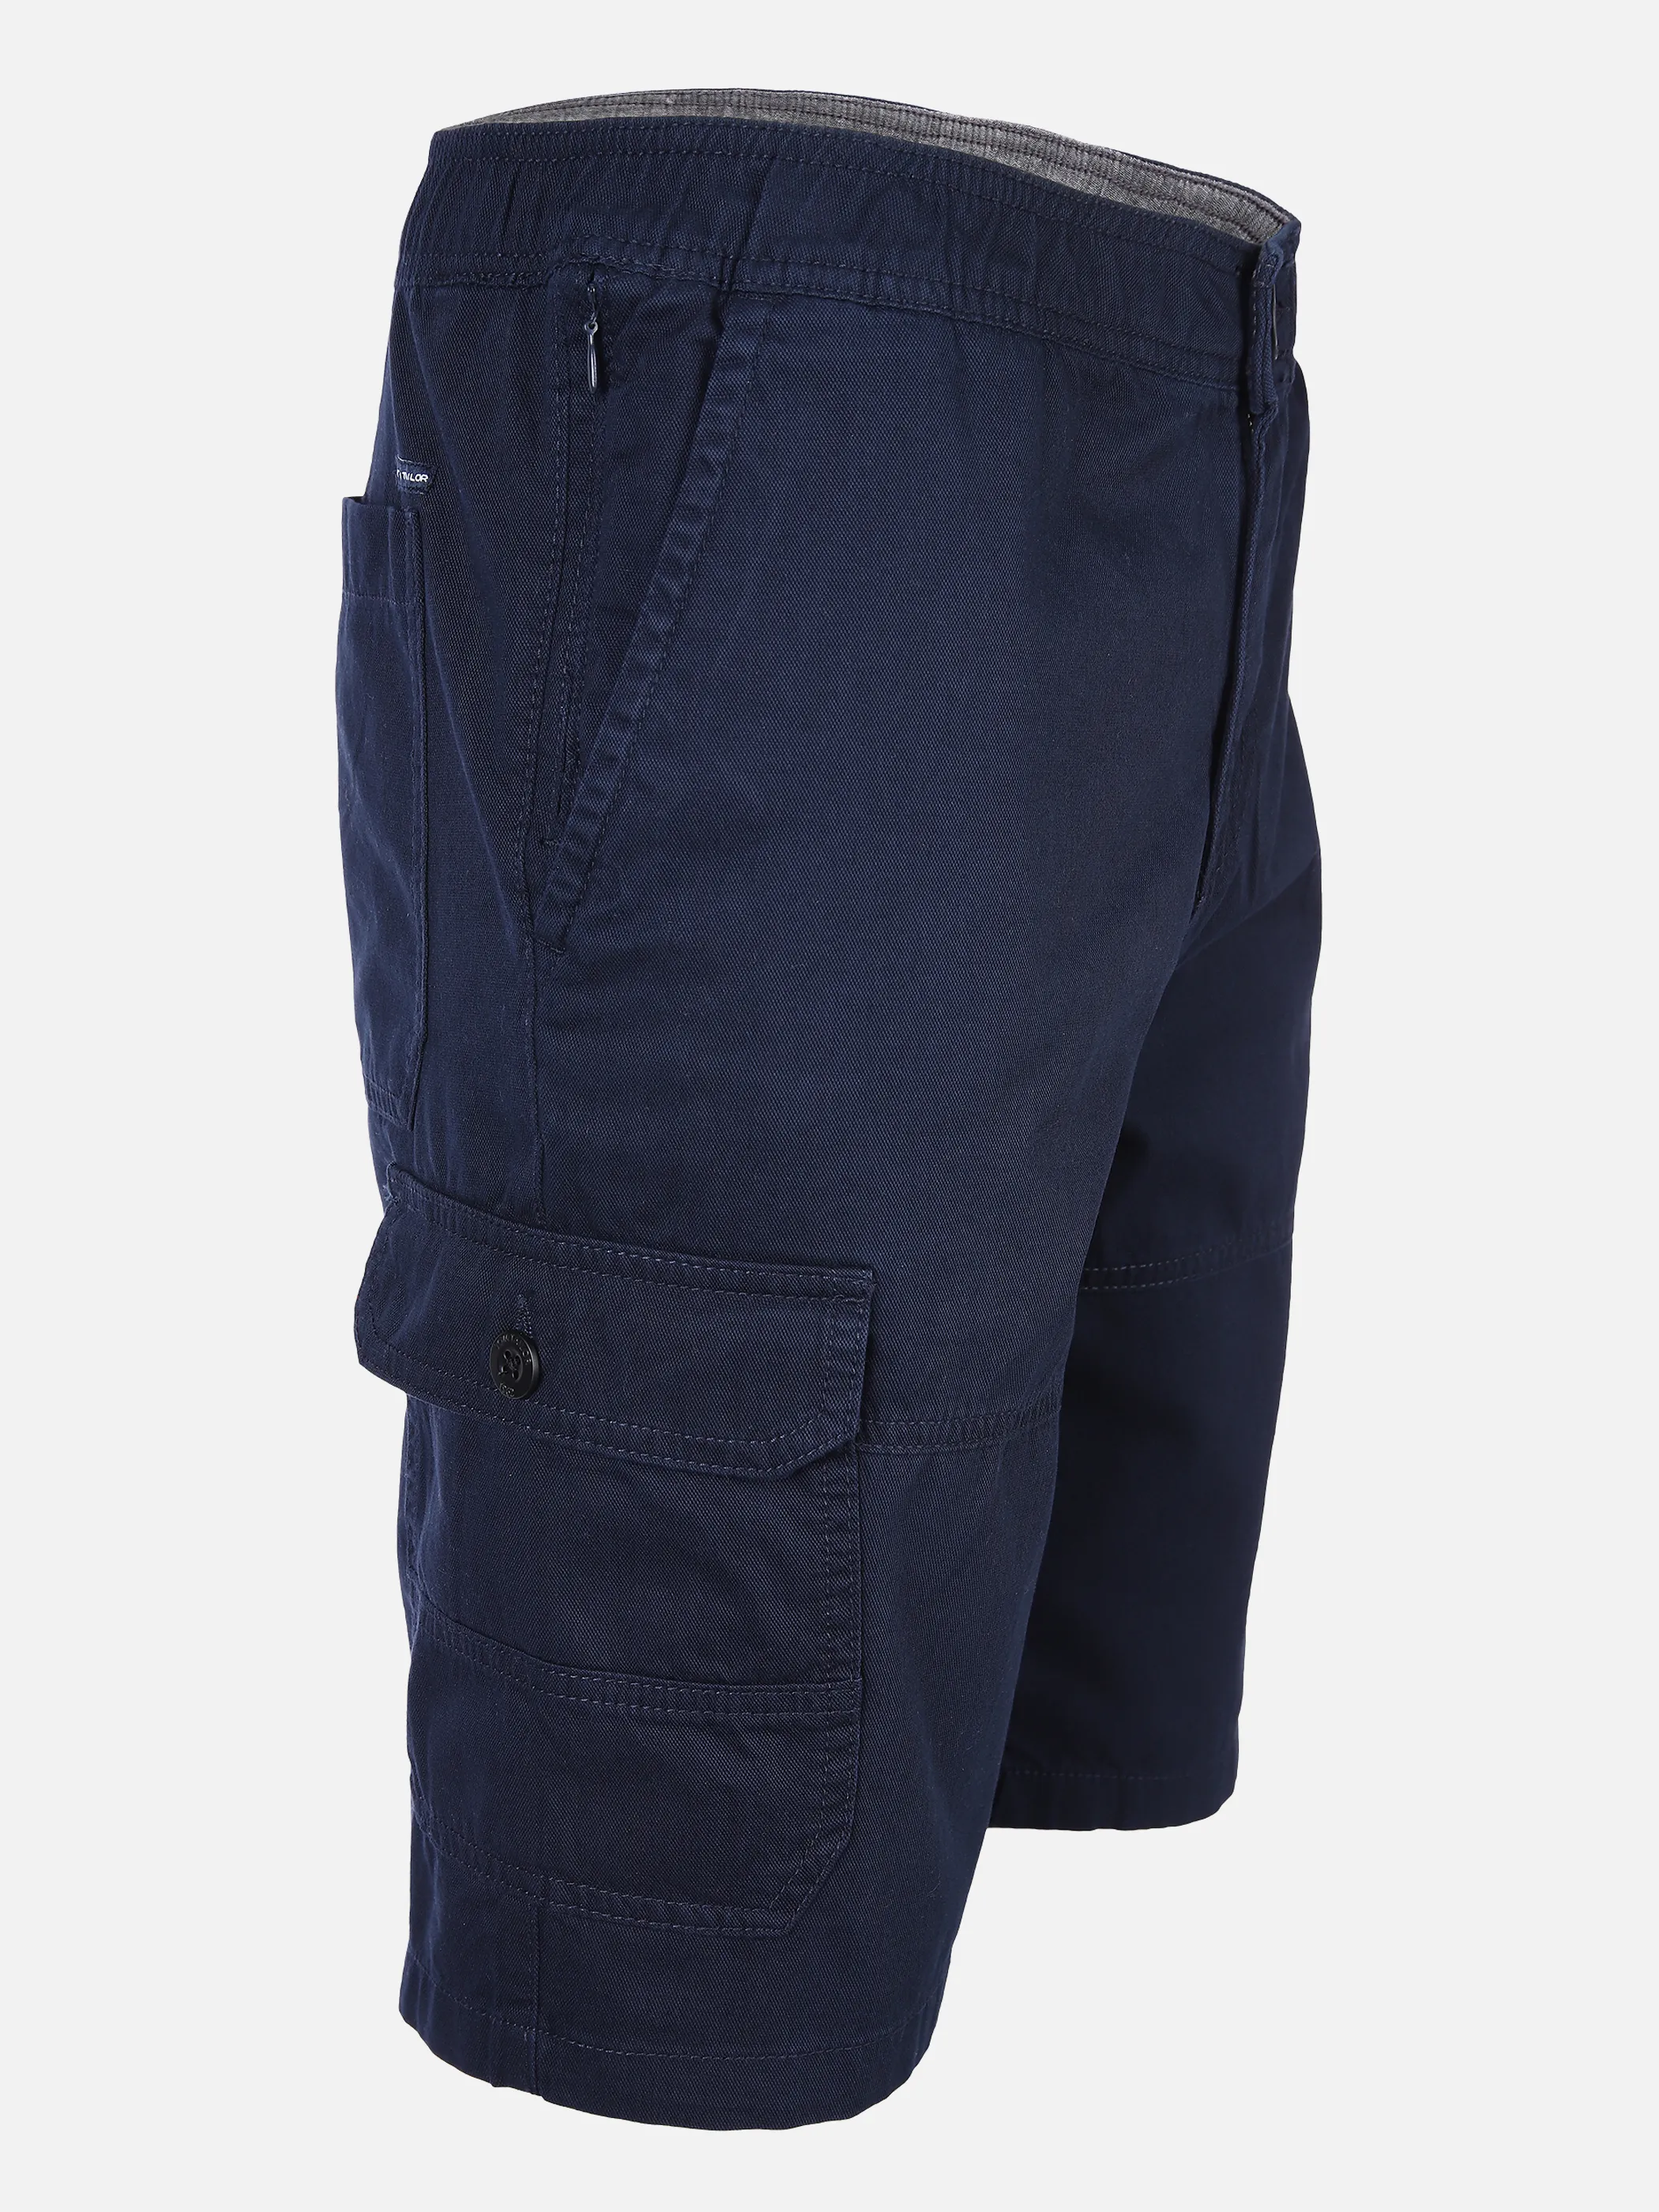 Tom Tailor 1031446 relaxed cargo shorts Blau 864567 10668 3